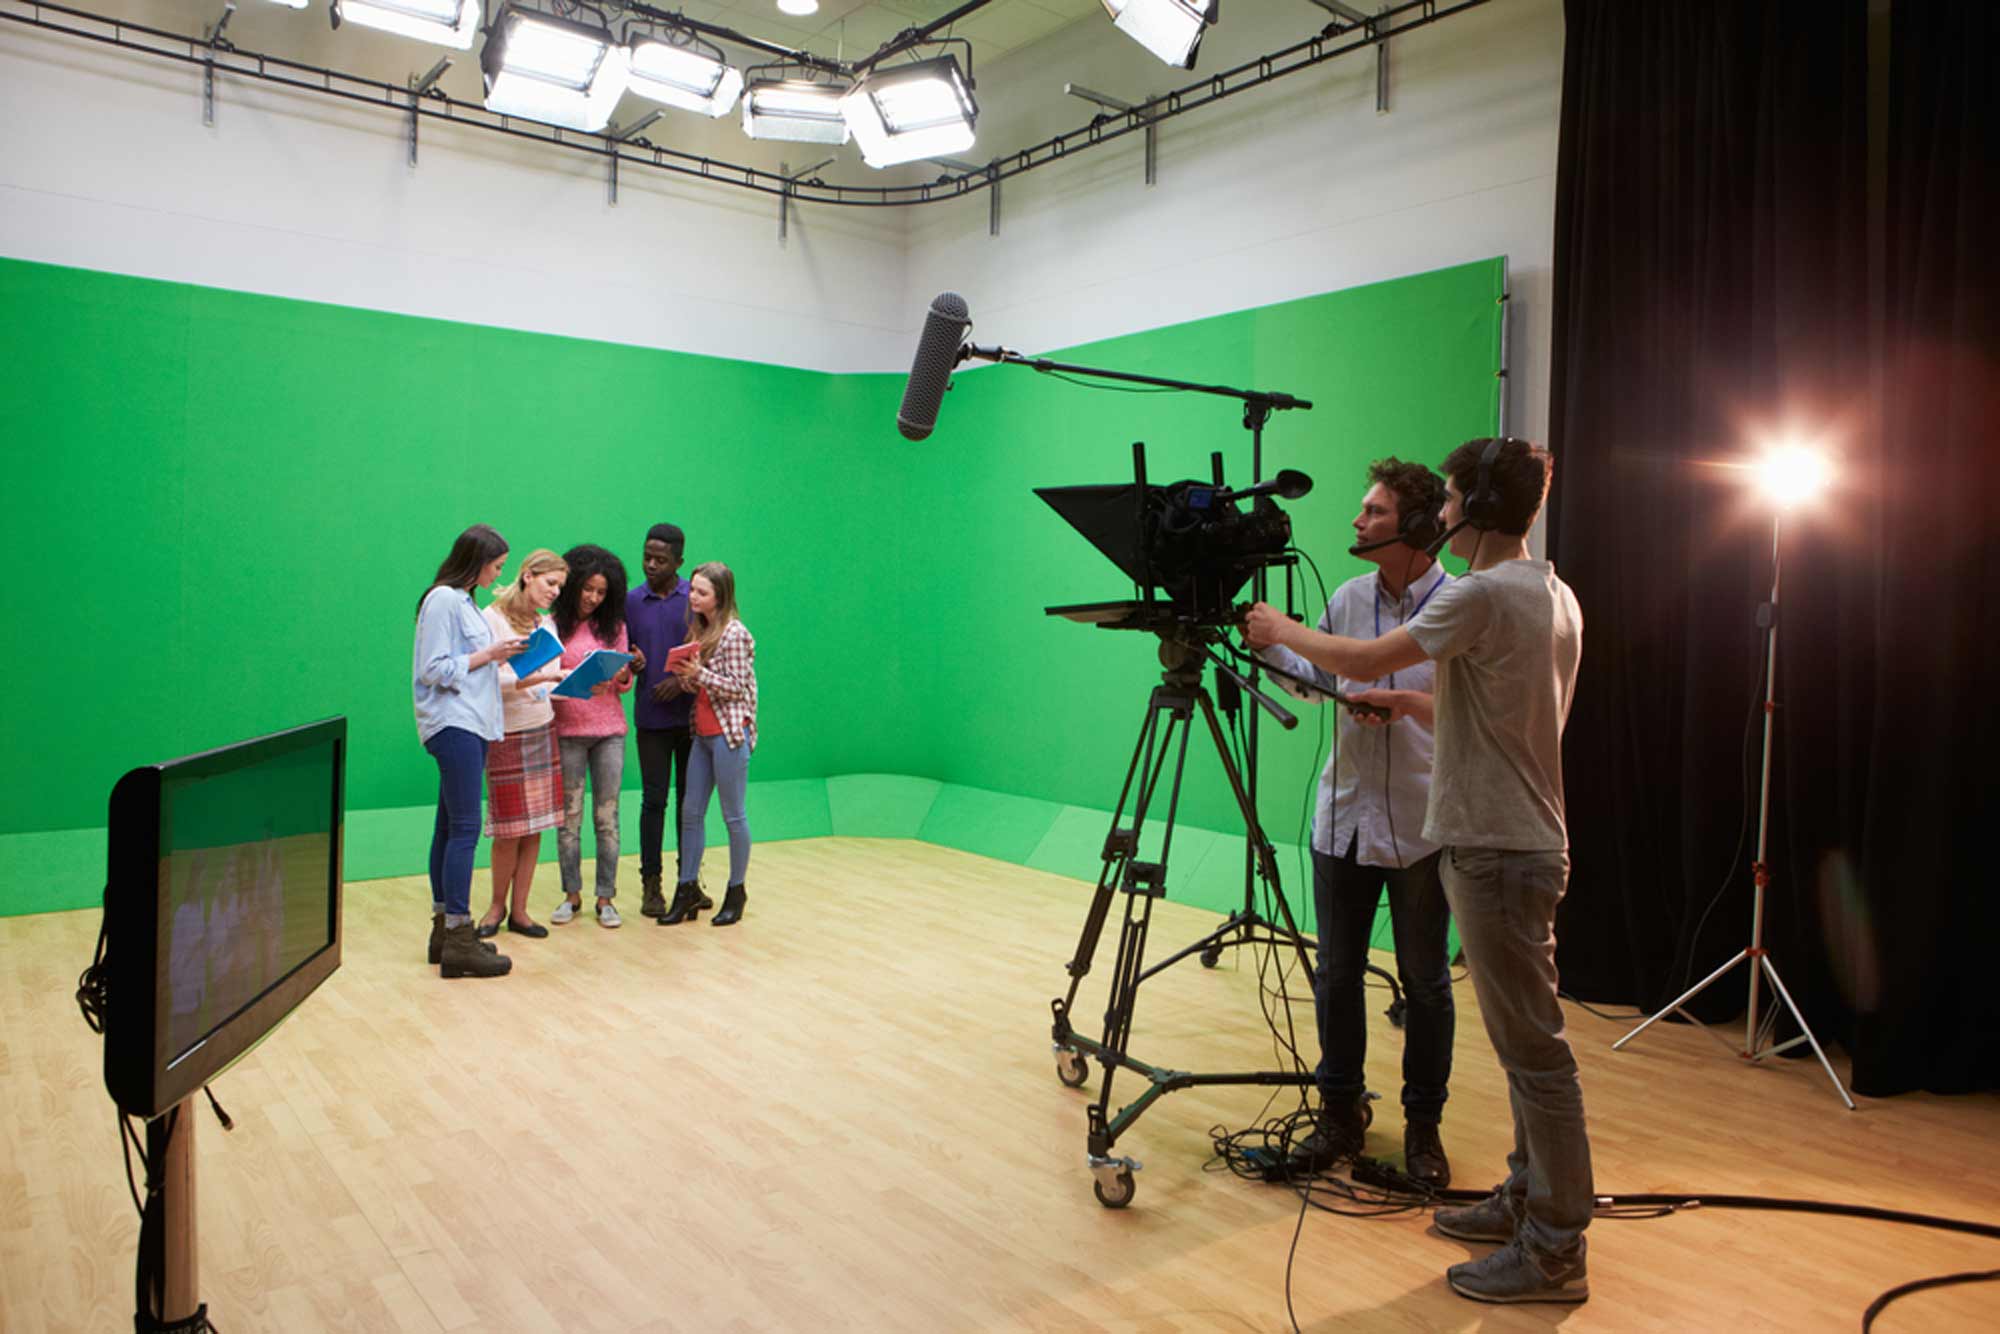 Step-By-Step Guide On How To Use The Green Screen Effect